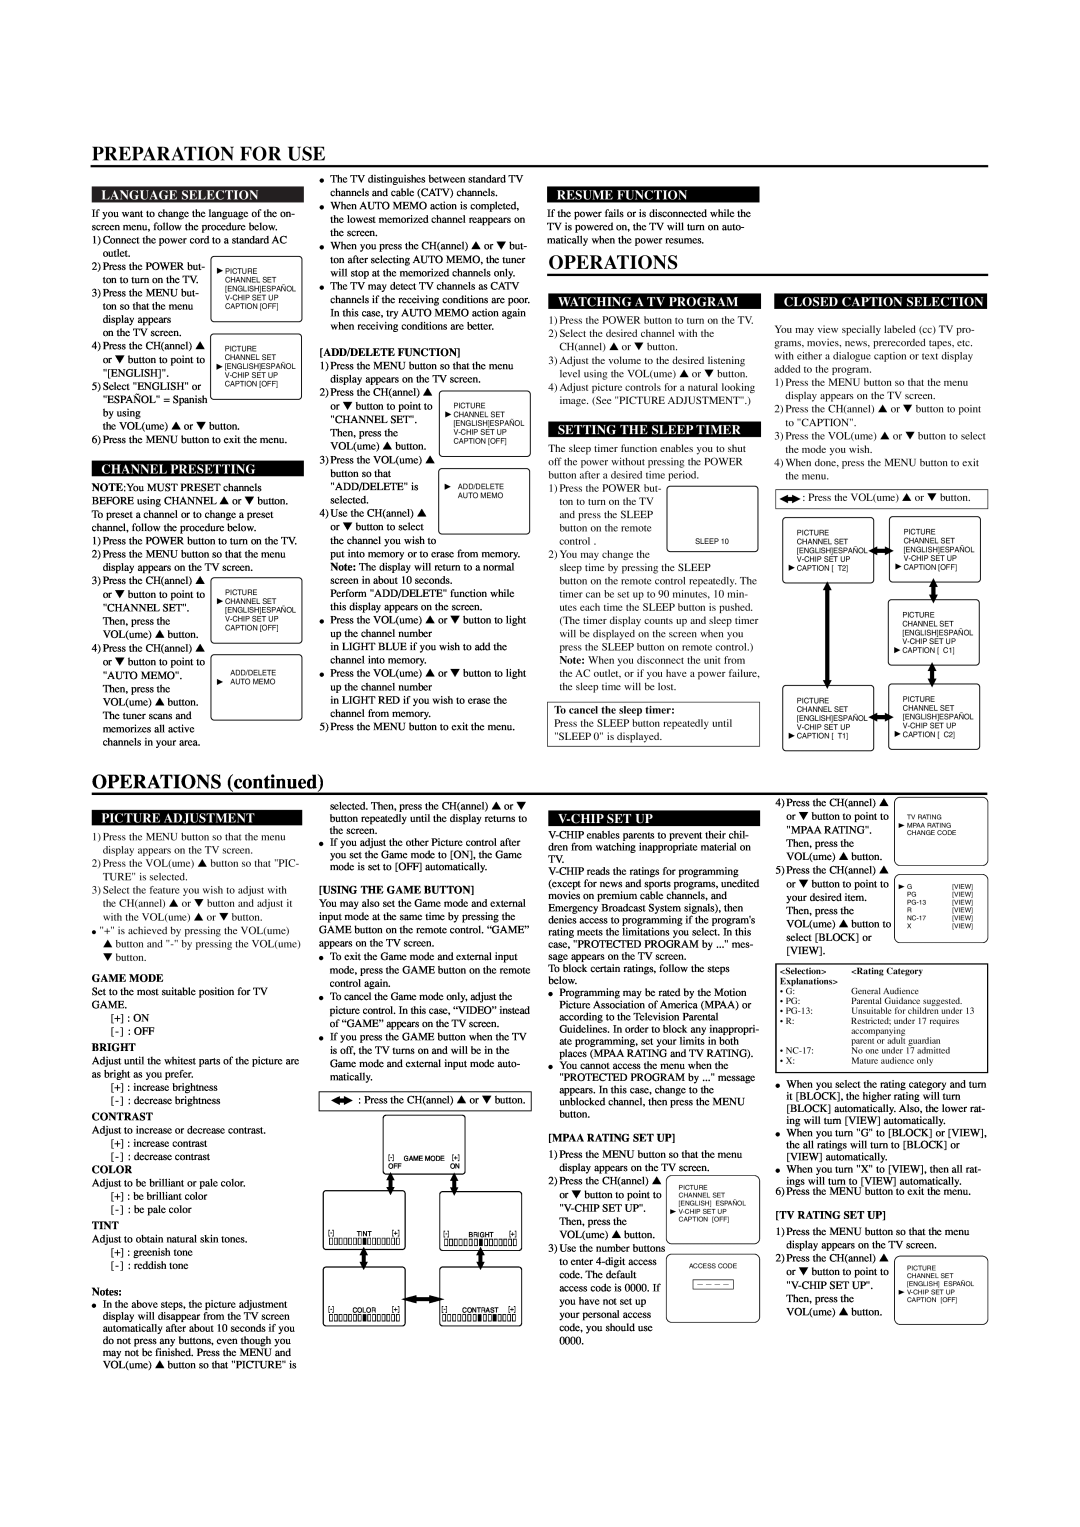 Sylvania SRT2313, SRT2319 Preparation For Use, Operations, OPERATIONS continued, Language Selection, Resume Function 